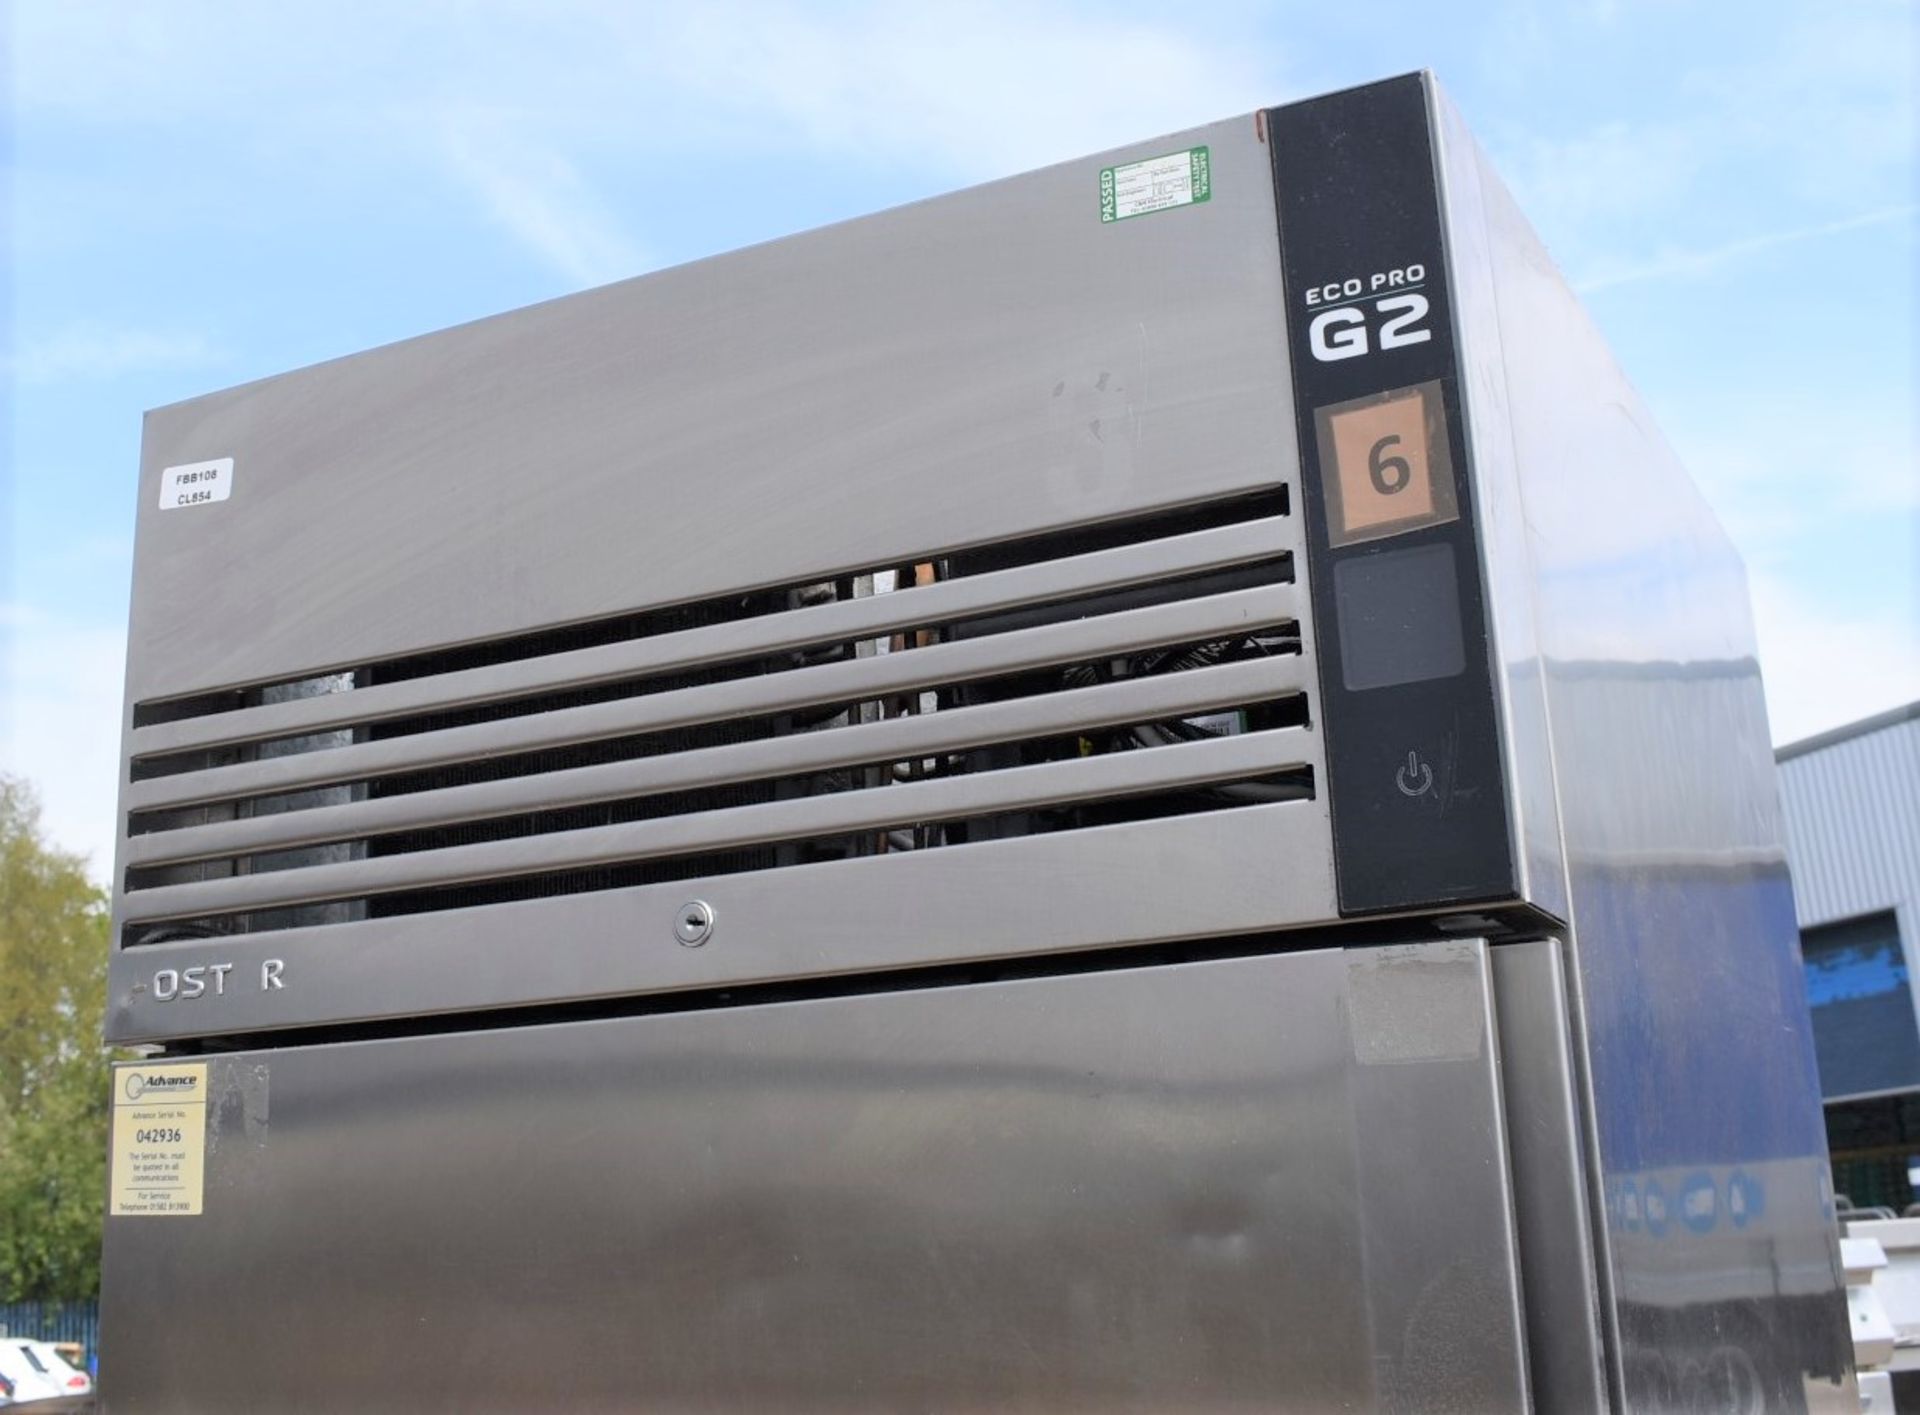 1 x Foster EcoPro G2 EP700M Upright Refrigerated Meat Cabinet - Stainless Steel Exterior RRP £3,059 - Image 2 of 6